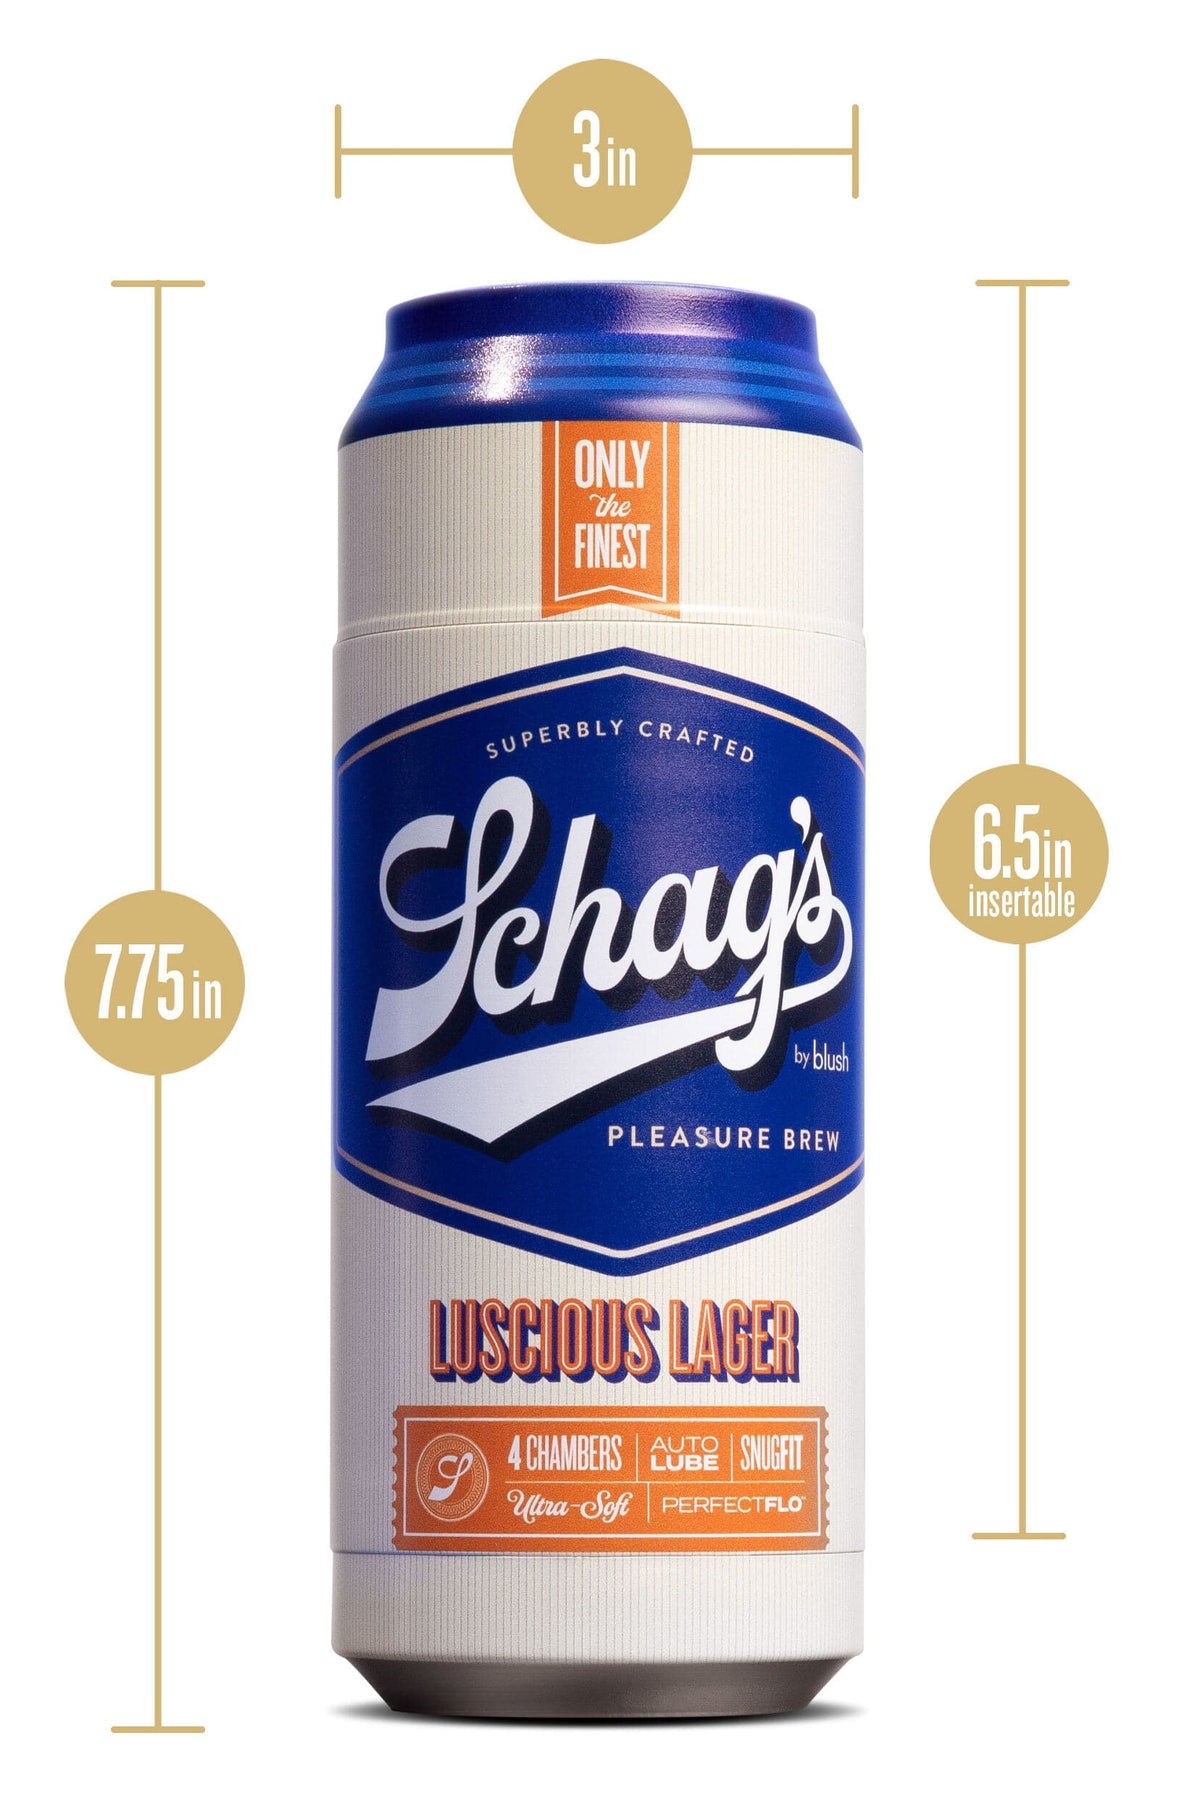 schags luscious lager frosted